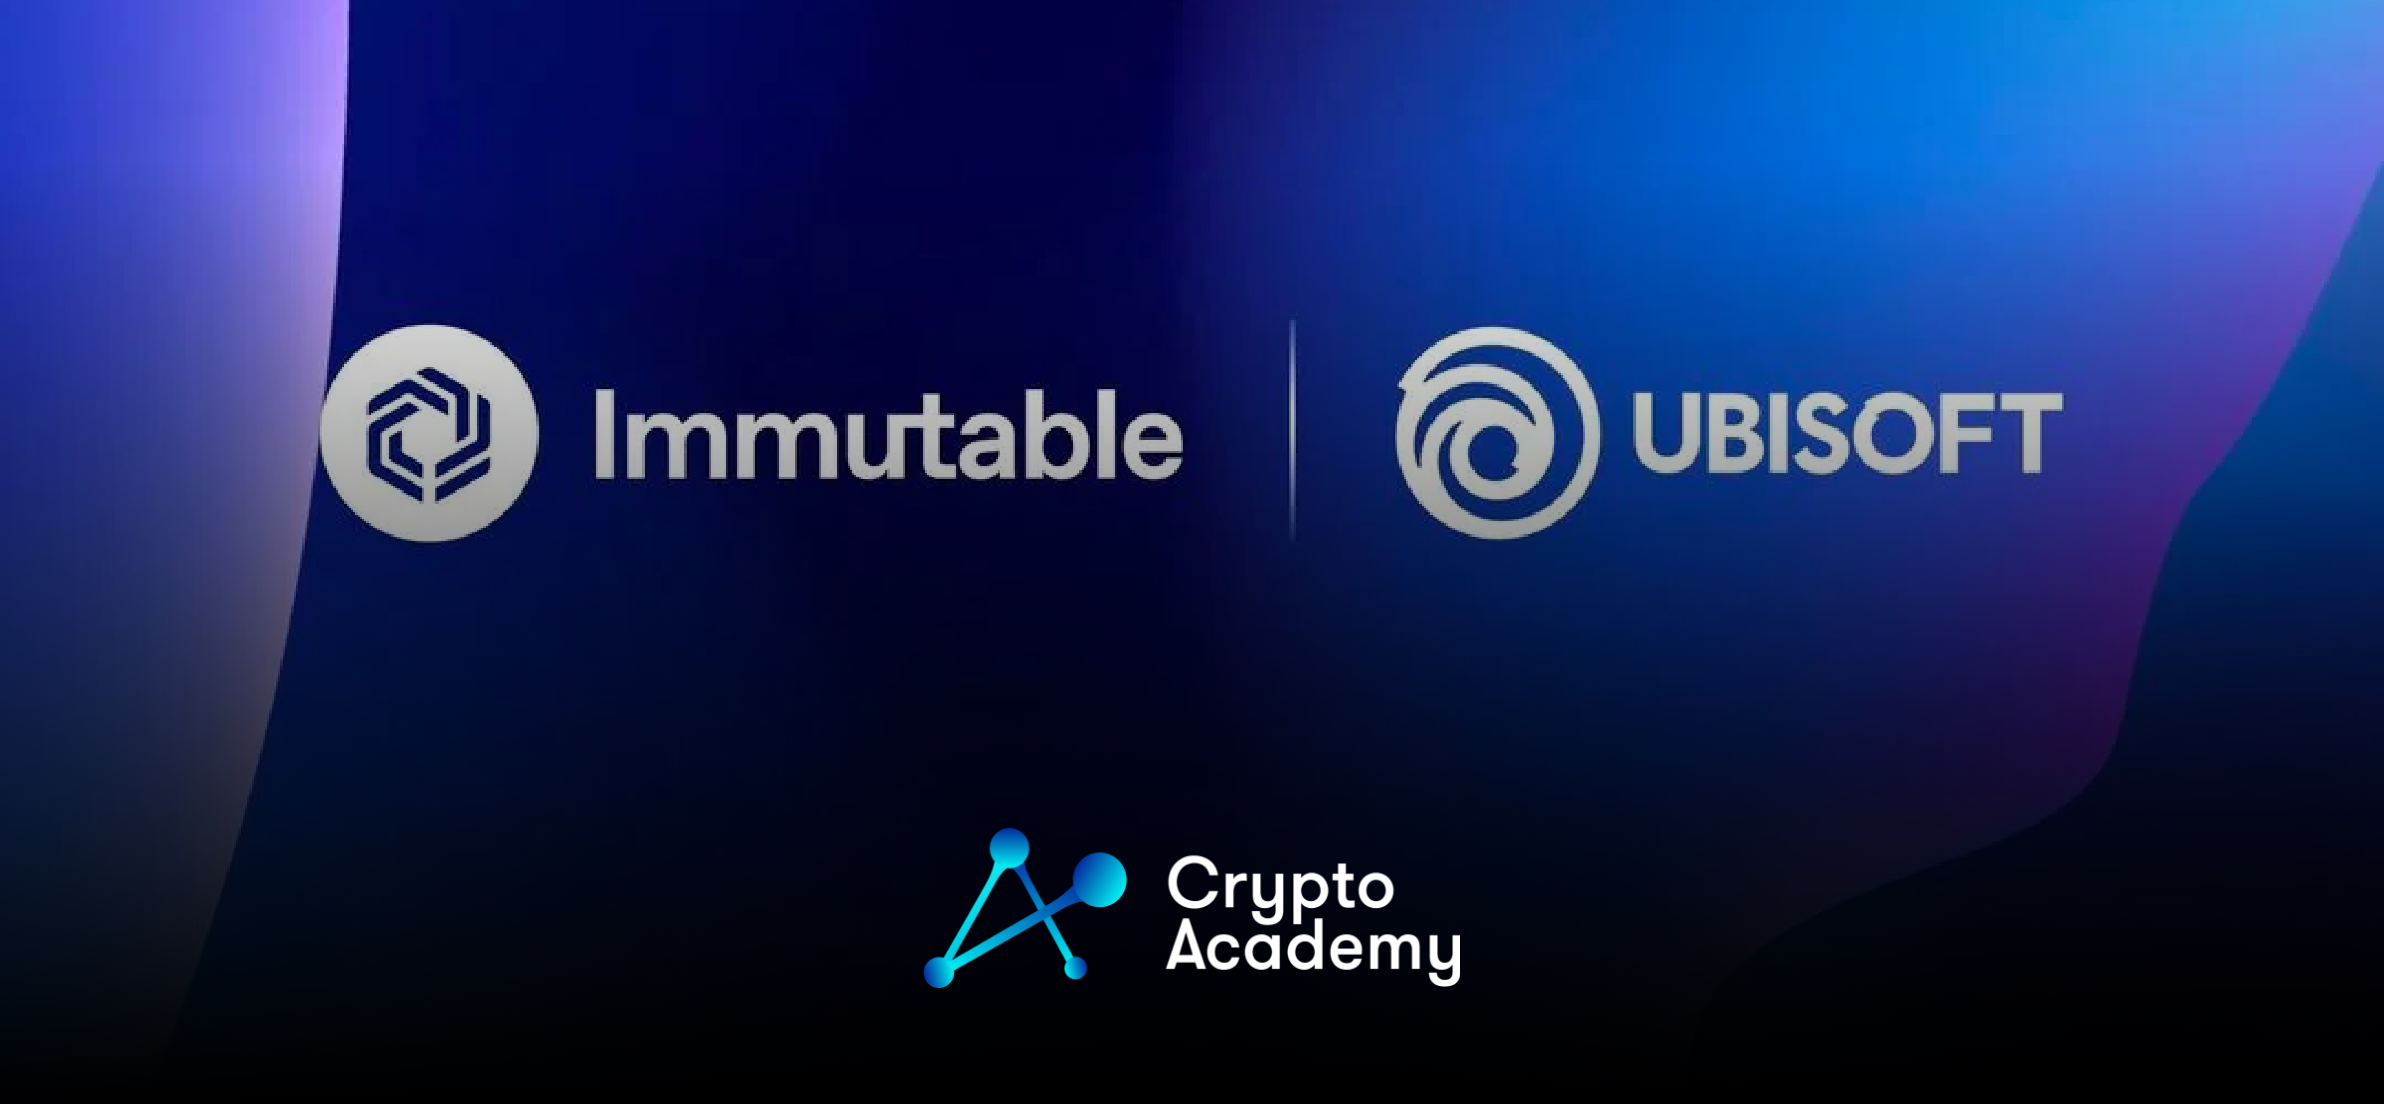 Ubisoft and Immutable Forge New Path in Web3 Gaming Innovation